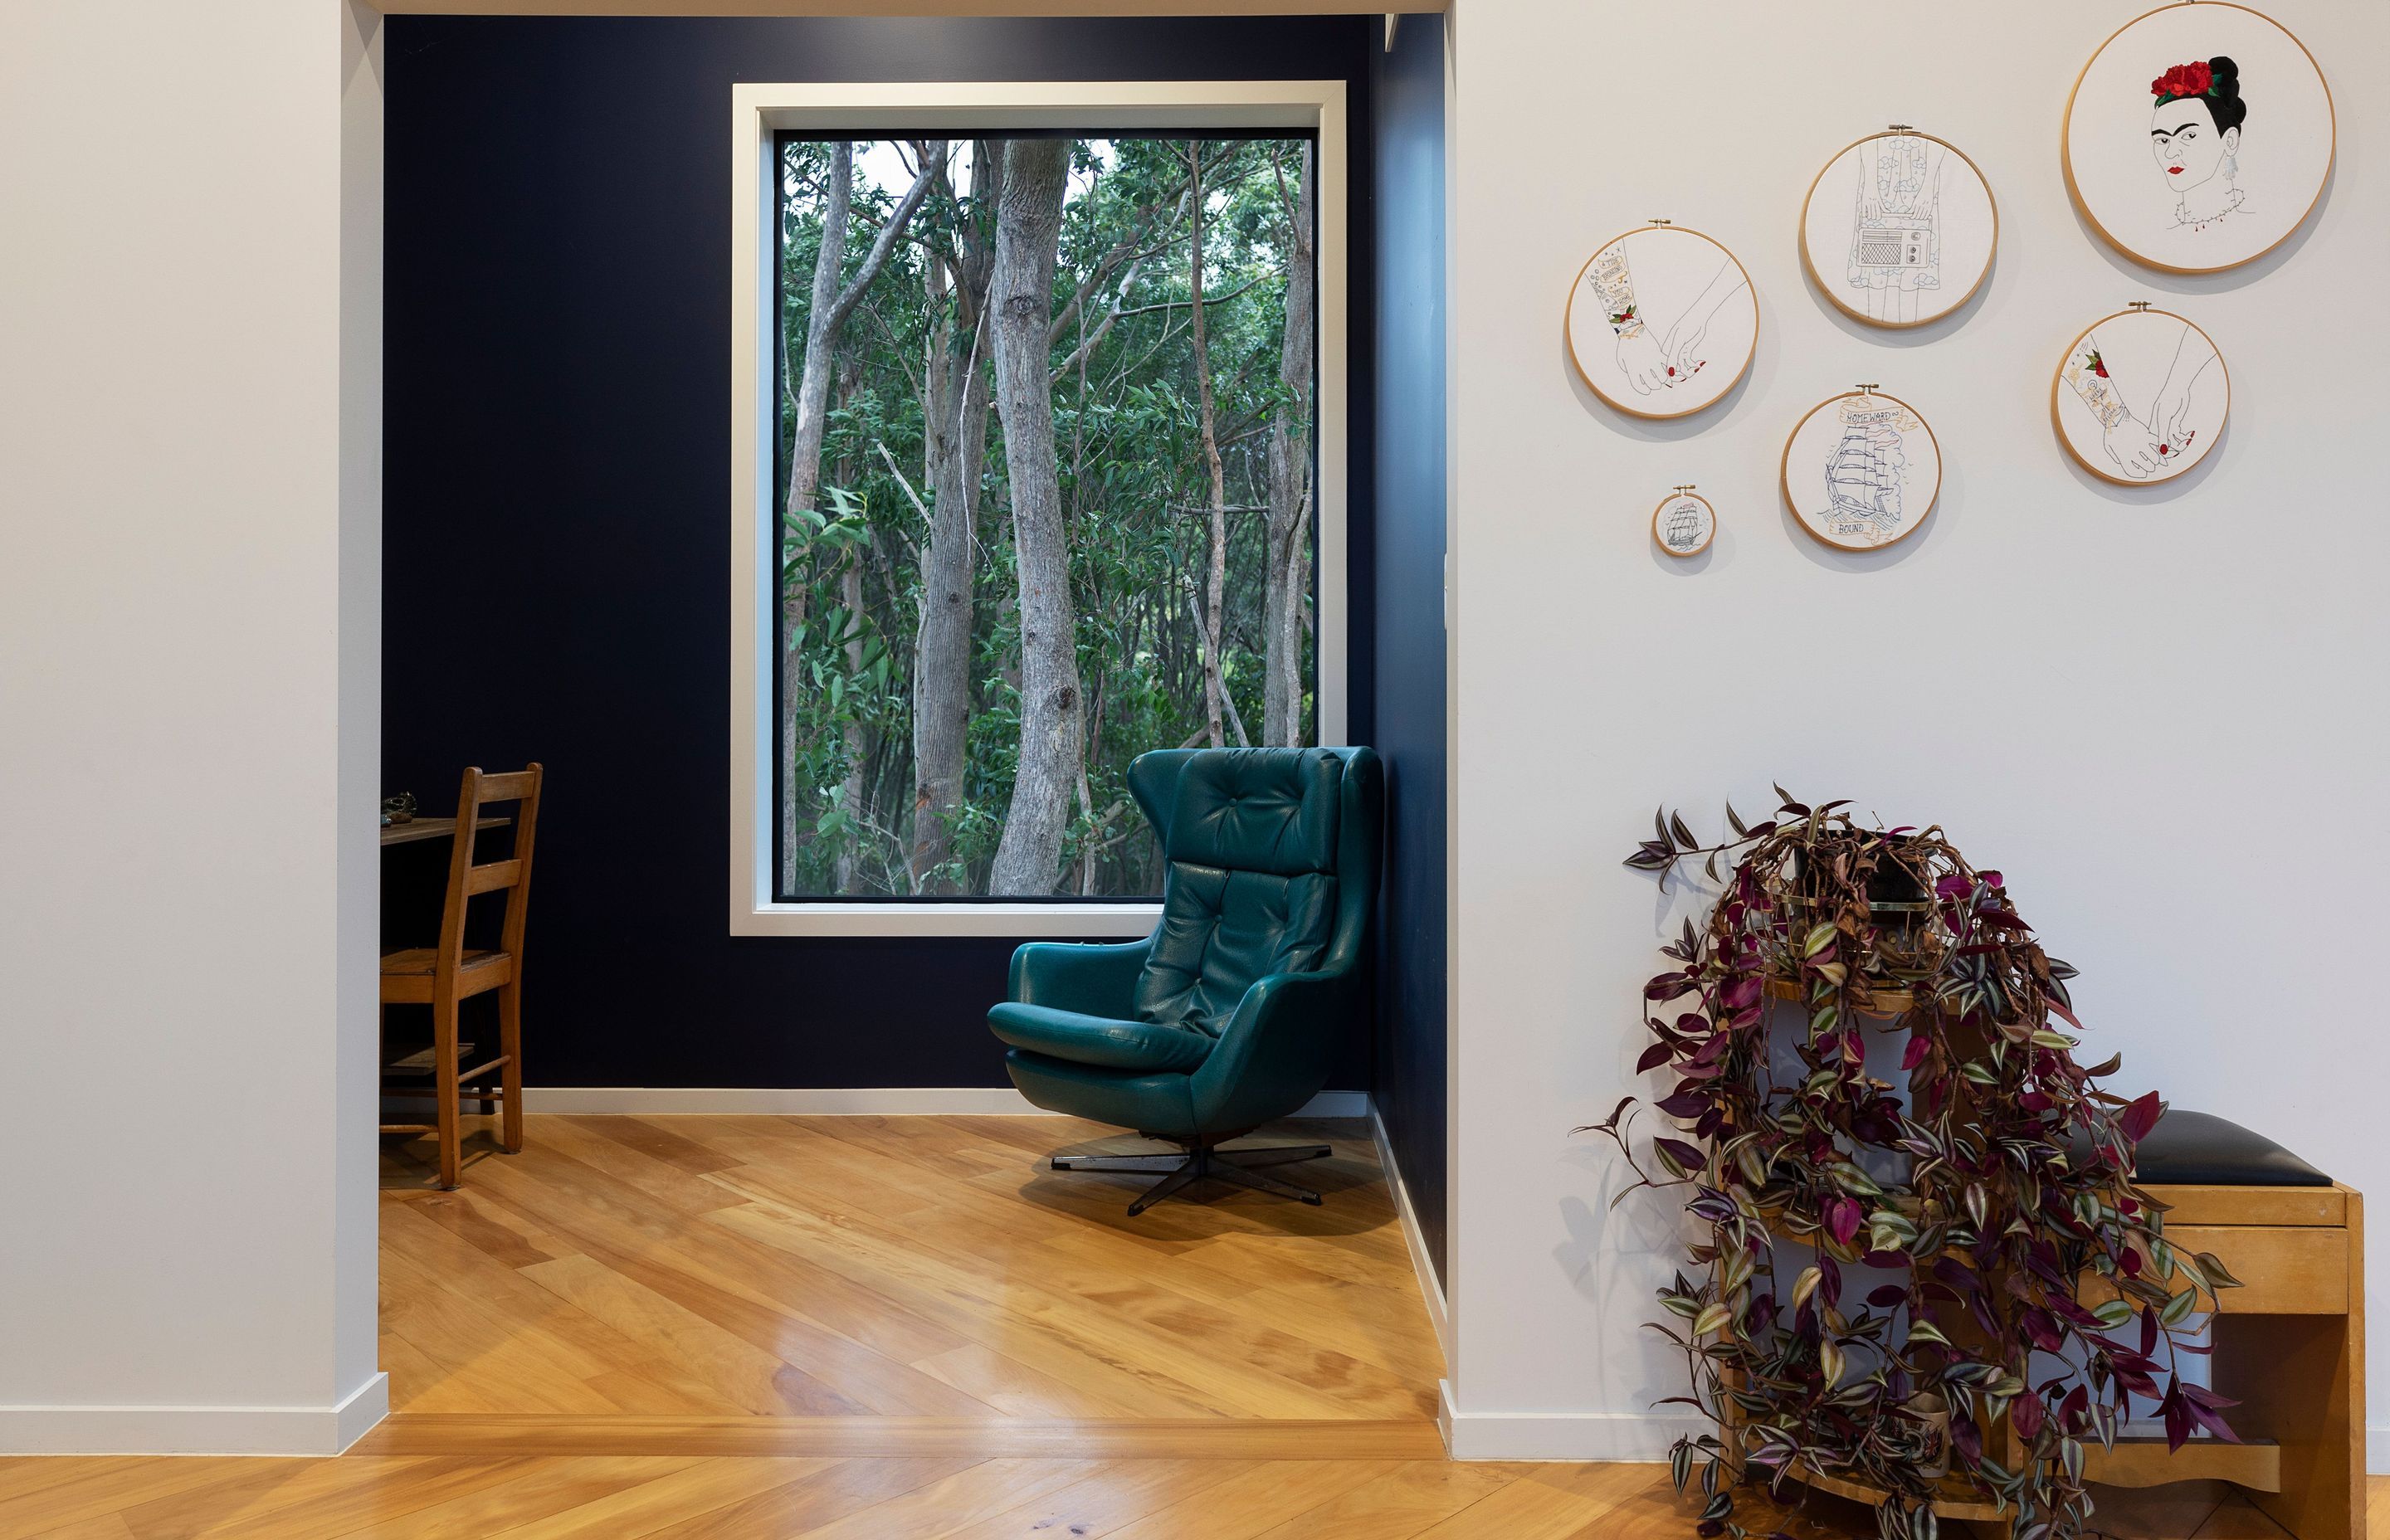 A small study, located directly to the left of the front door peeks into a stand of eucalypts, reinforcing the ever-present connection between the built and natural environments.